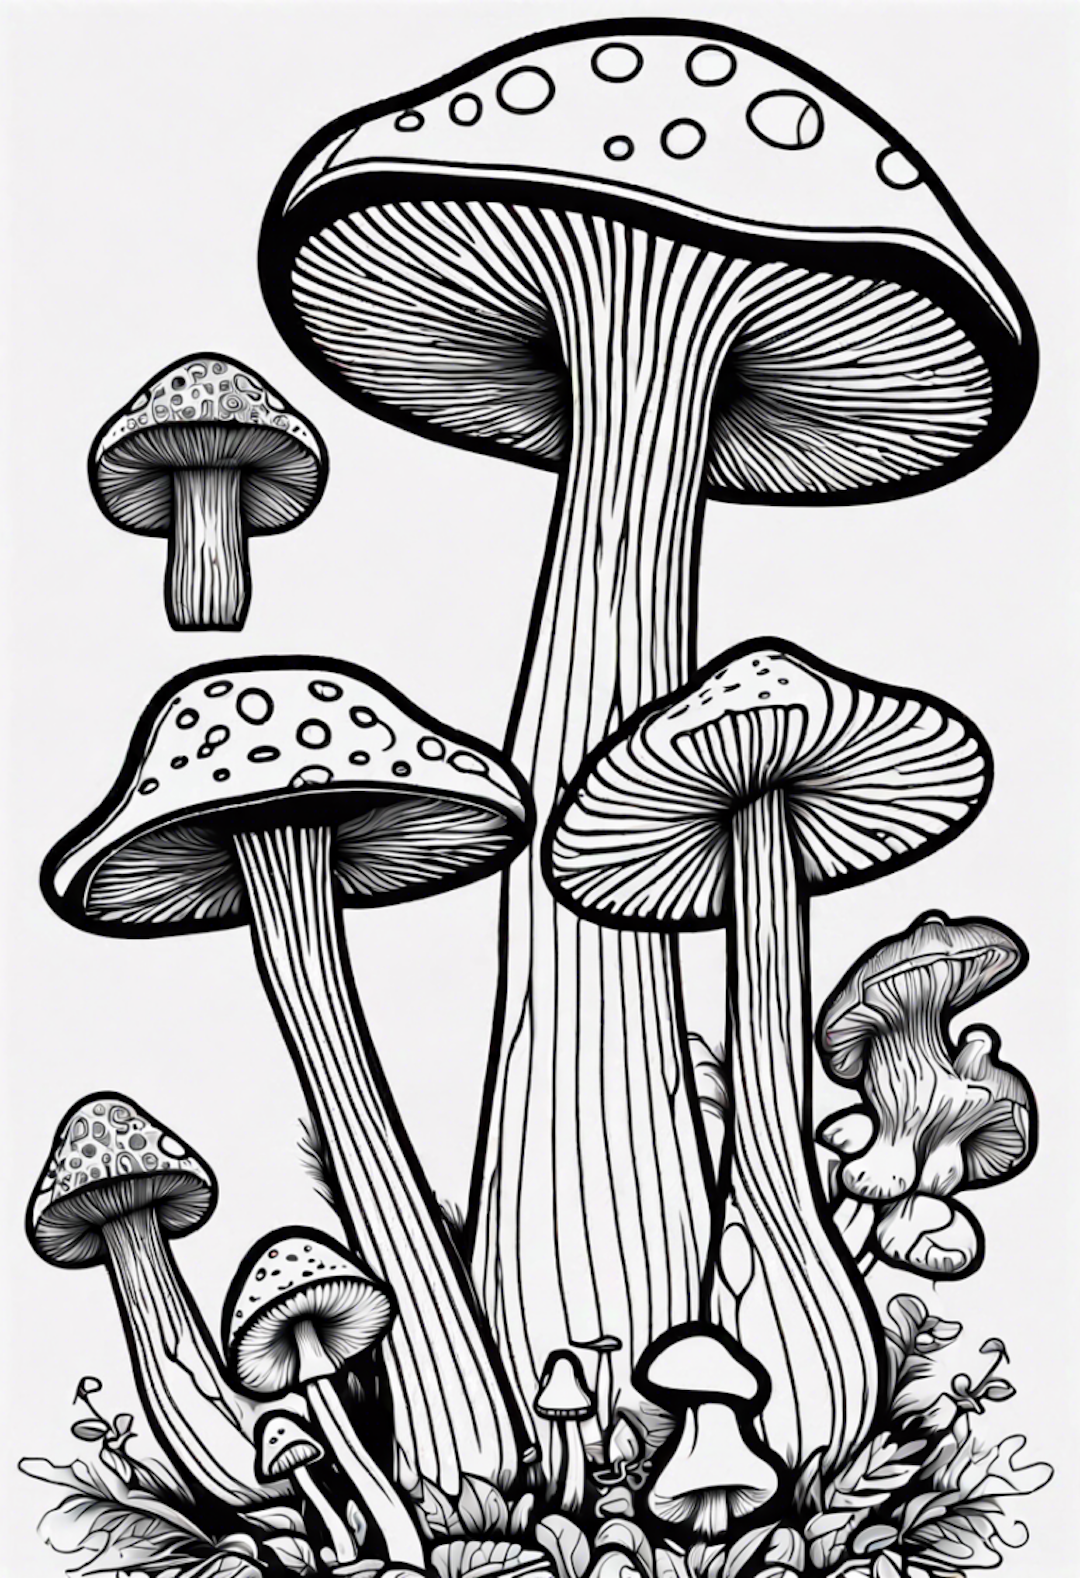 Magical Mushroom Garden Coloring Page coloring pages